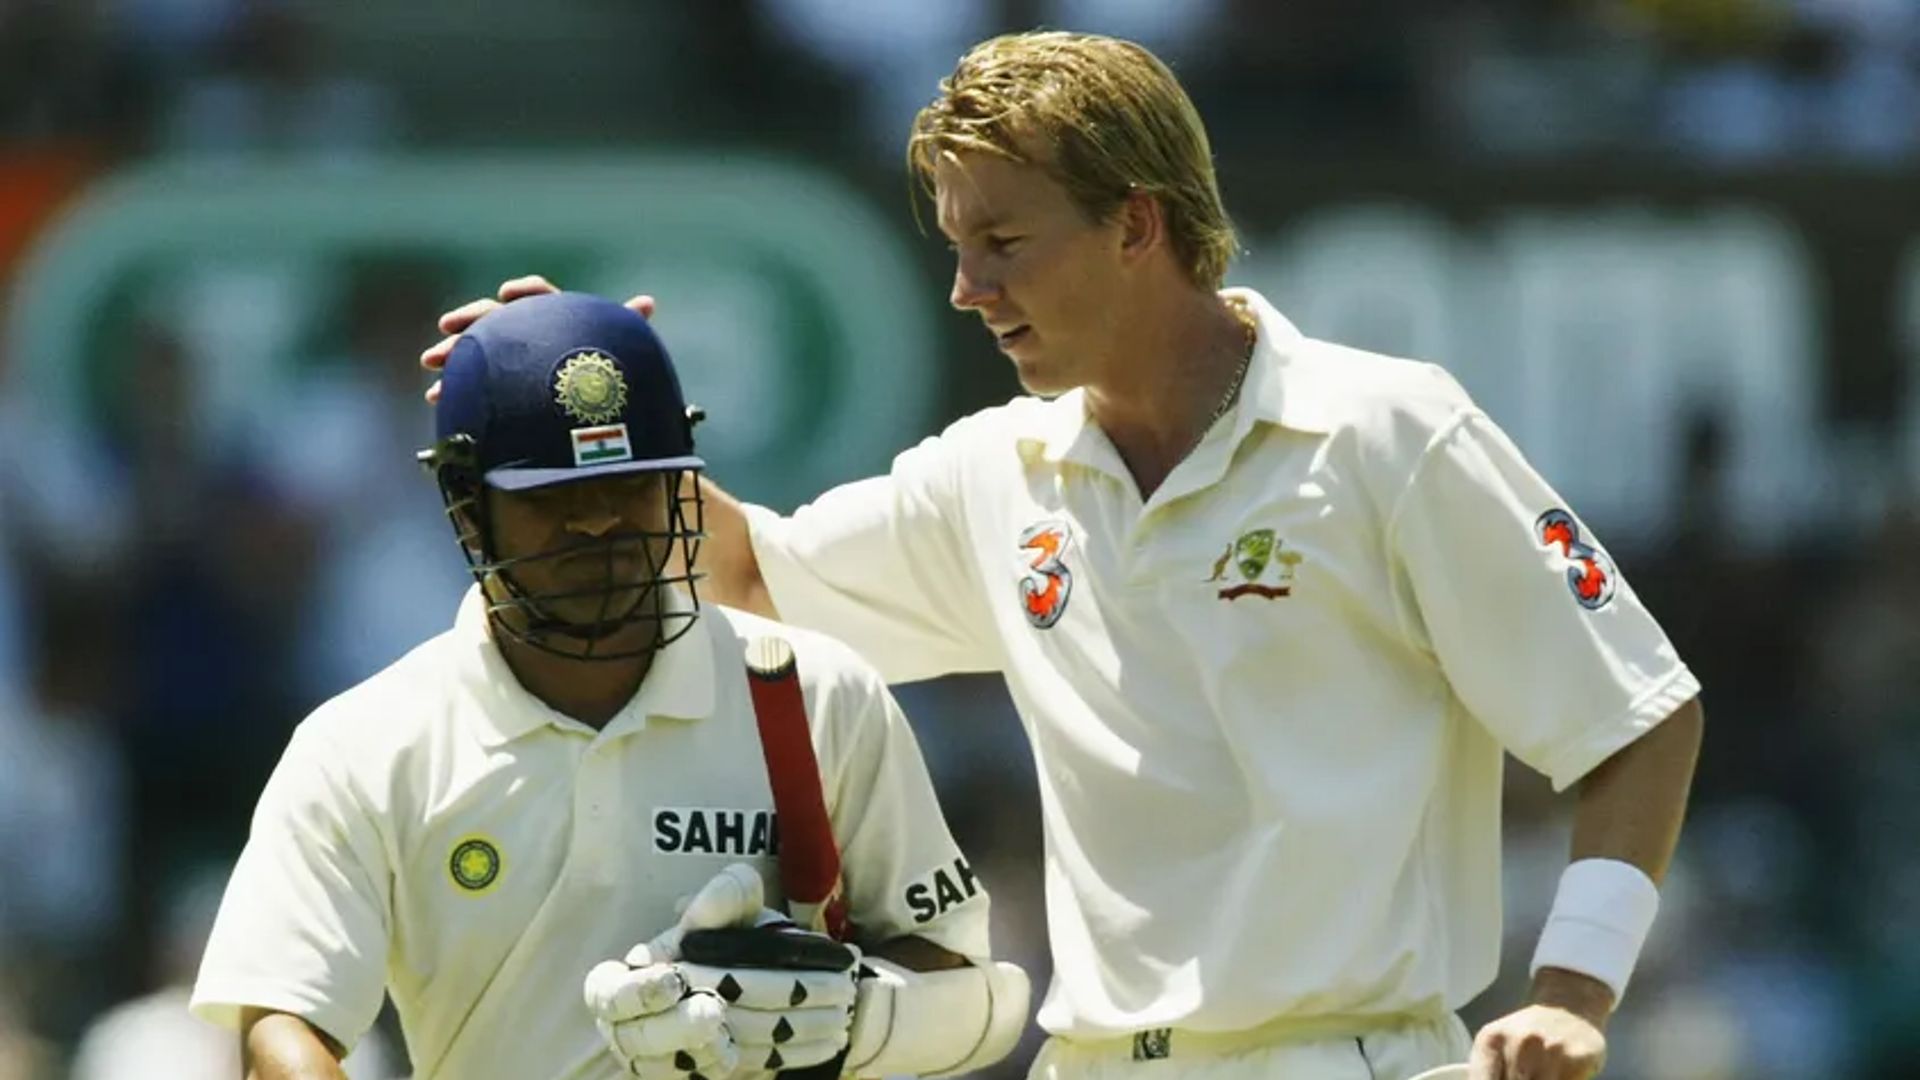 Brett Lee was one of the finest bowlers across formats (Courtesy: Cricket Australia)